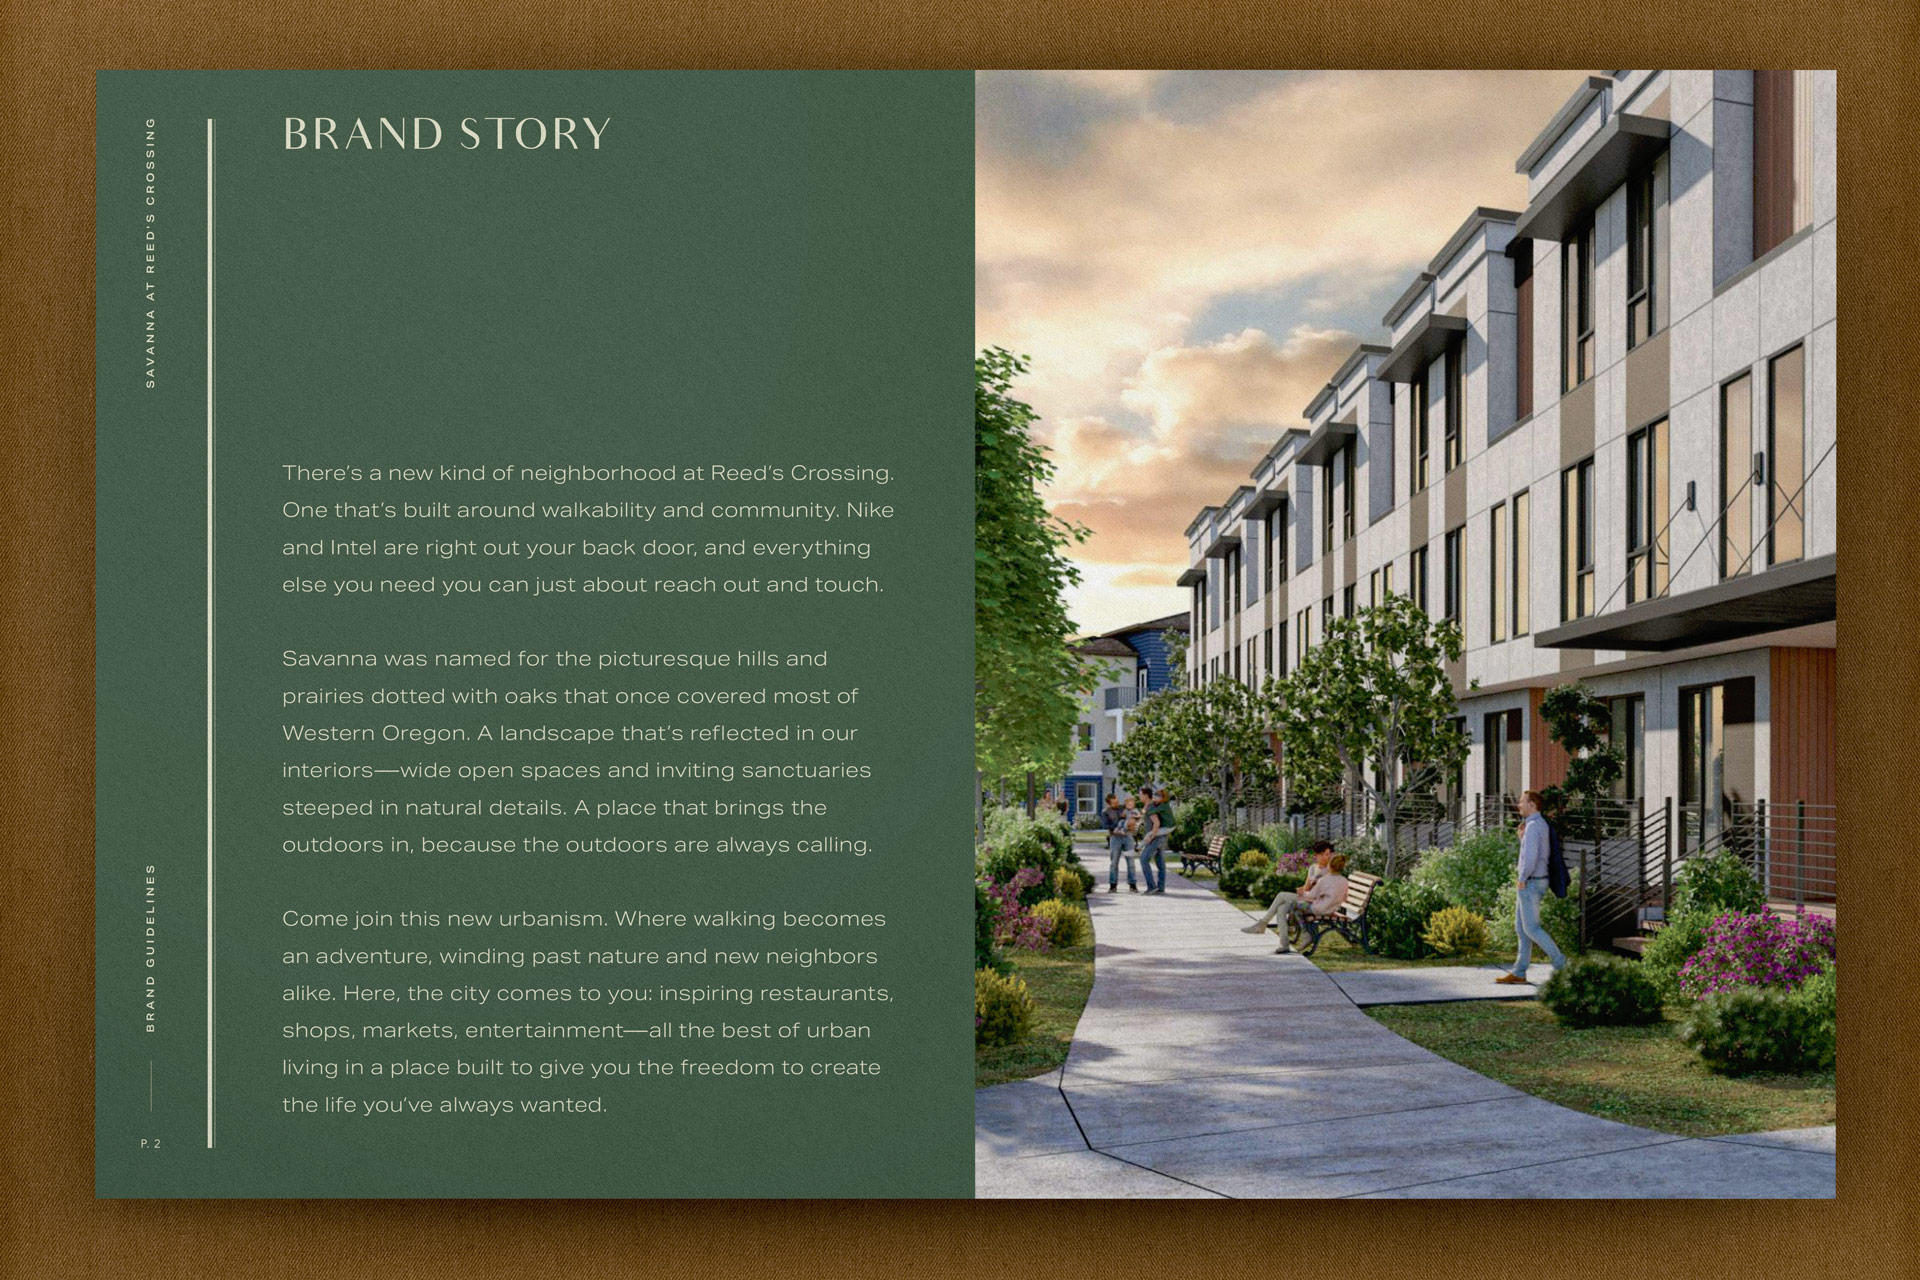 Savanna at Reed's Crossing branding story created by Incubate Design